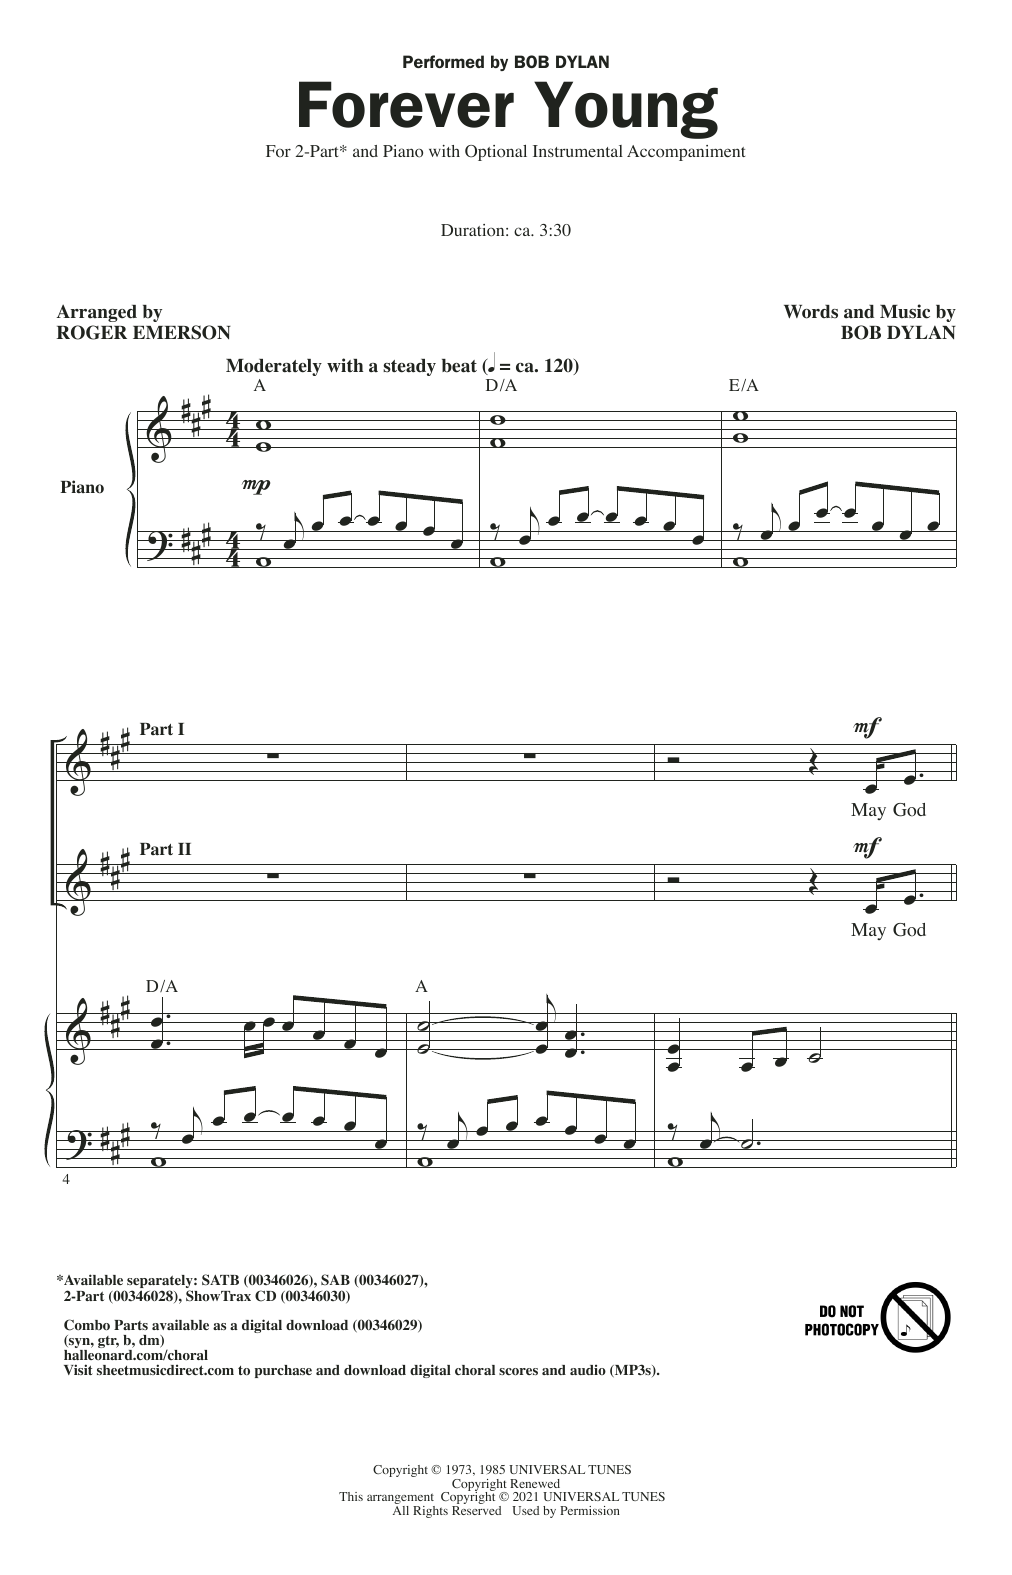 Download Bob Dylan Forever Young (arr. Roger Emerson) Sheet Music